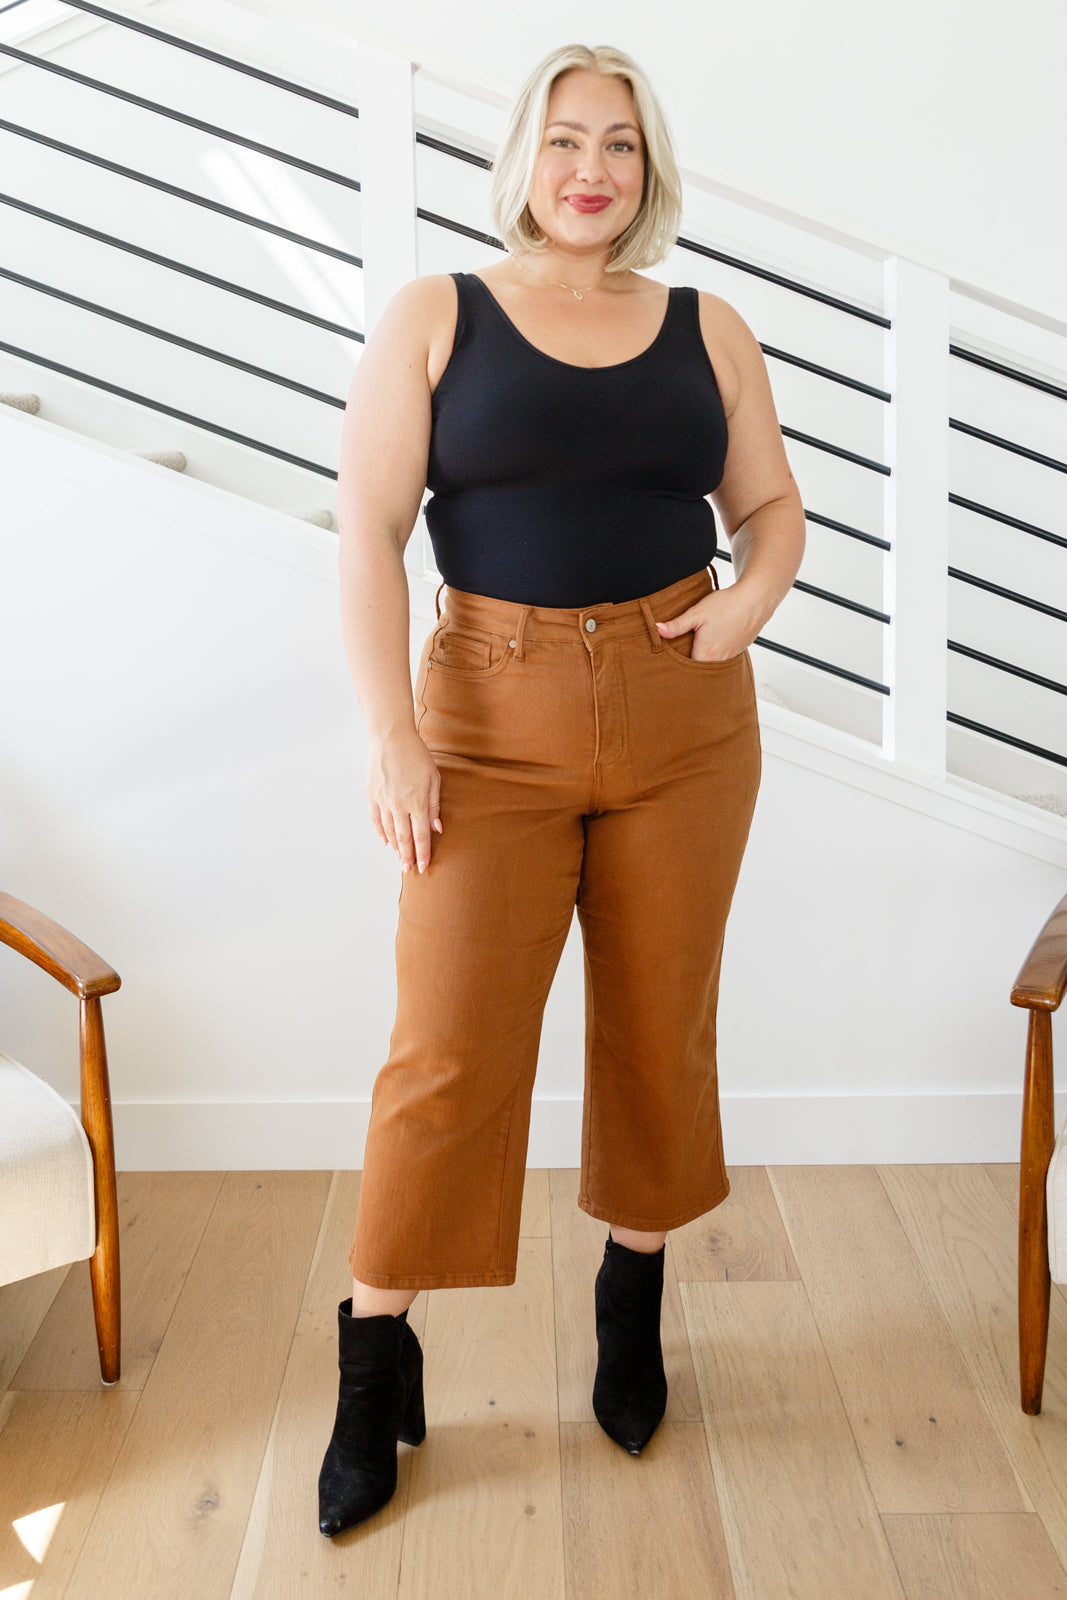 Discover your new favorite jeans with Briar's High Rise Control Top Wide Leg Crop Jeans from Judy Blue. Our triple threat of design, fit, and color come together for maximum style, comfort, and chicness. Features include high rise, tummy control tech, and a wide leg crop in a warm rich garment-dyed camel. Complete with coordinating hardware and you're ready to look and feel amazing! 0 - 24W